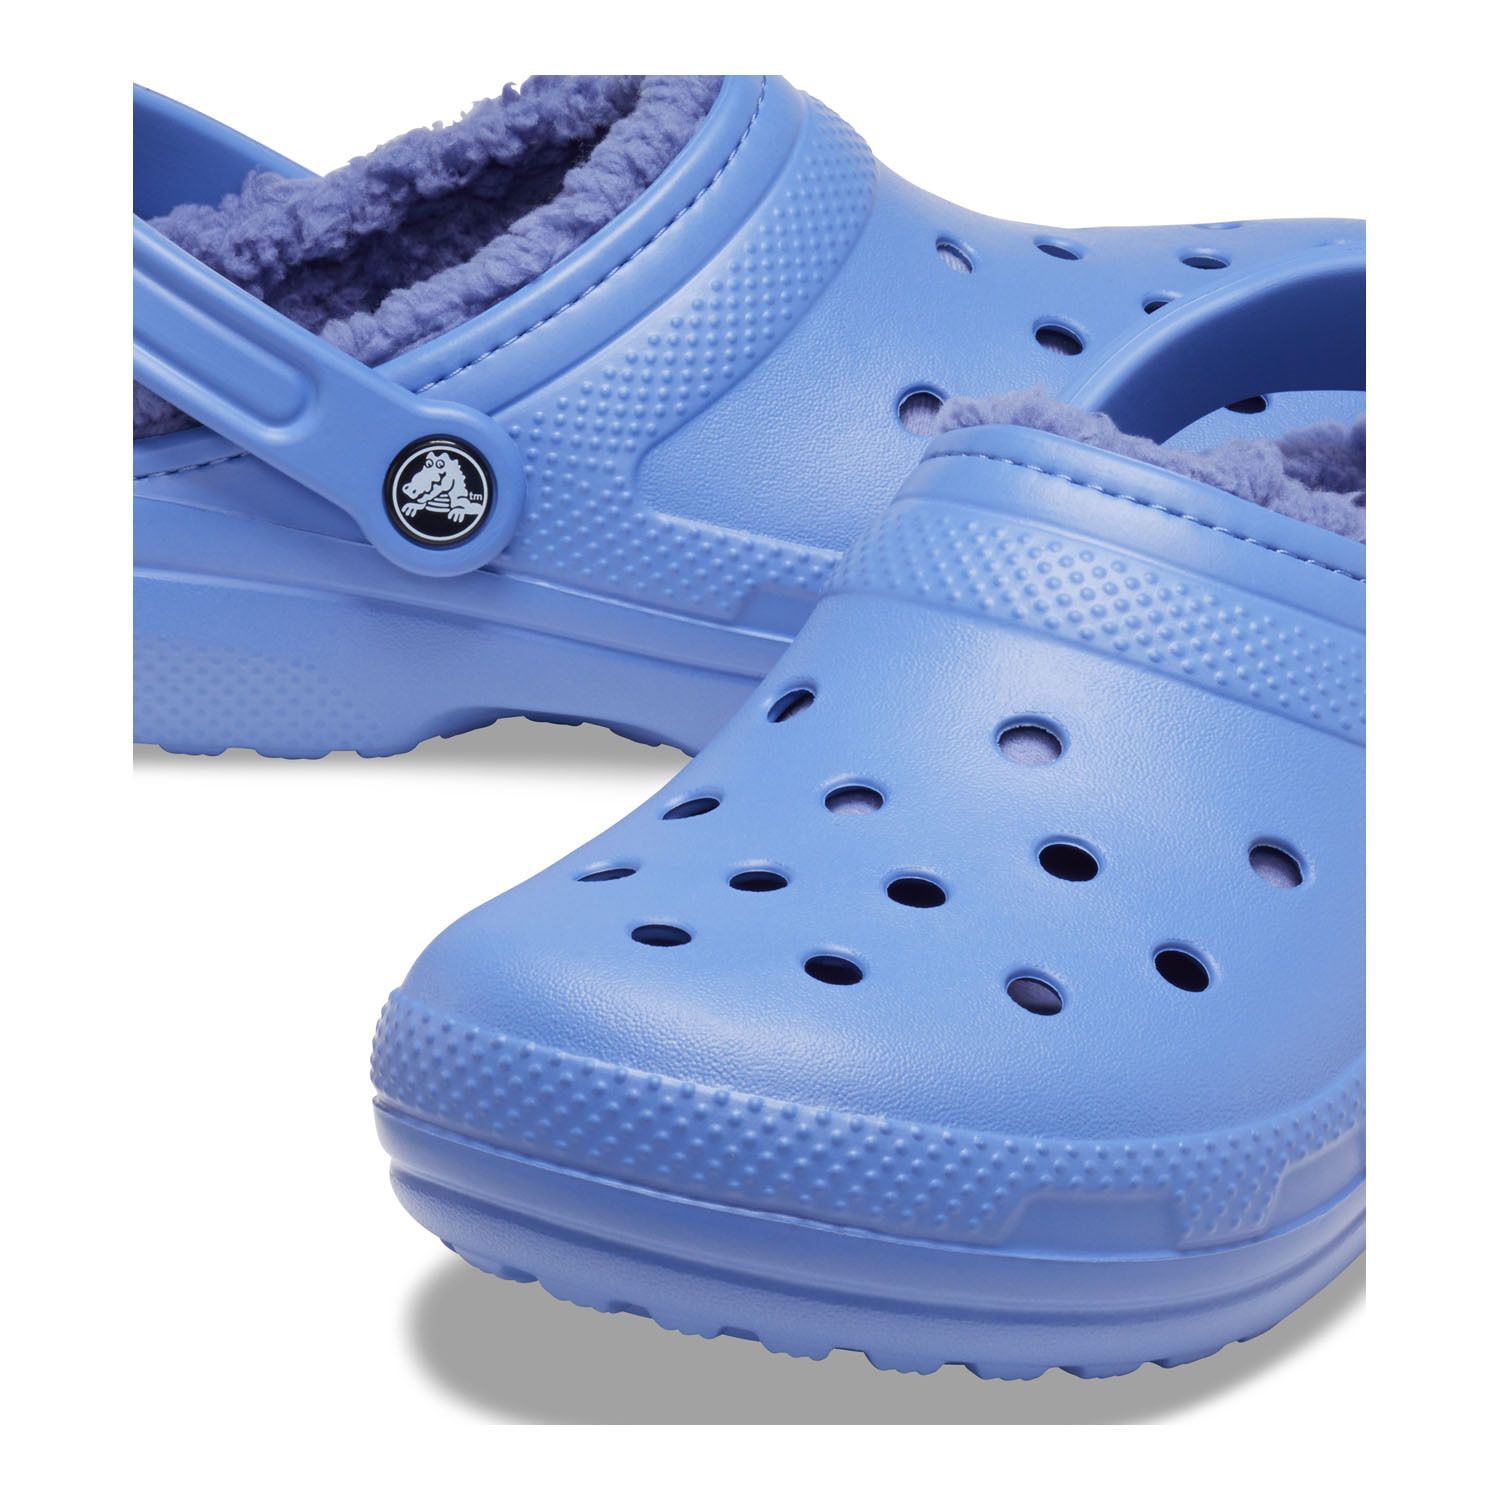 Cozy up to 15% off Crocs at Kohl's 